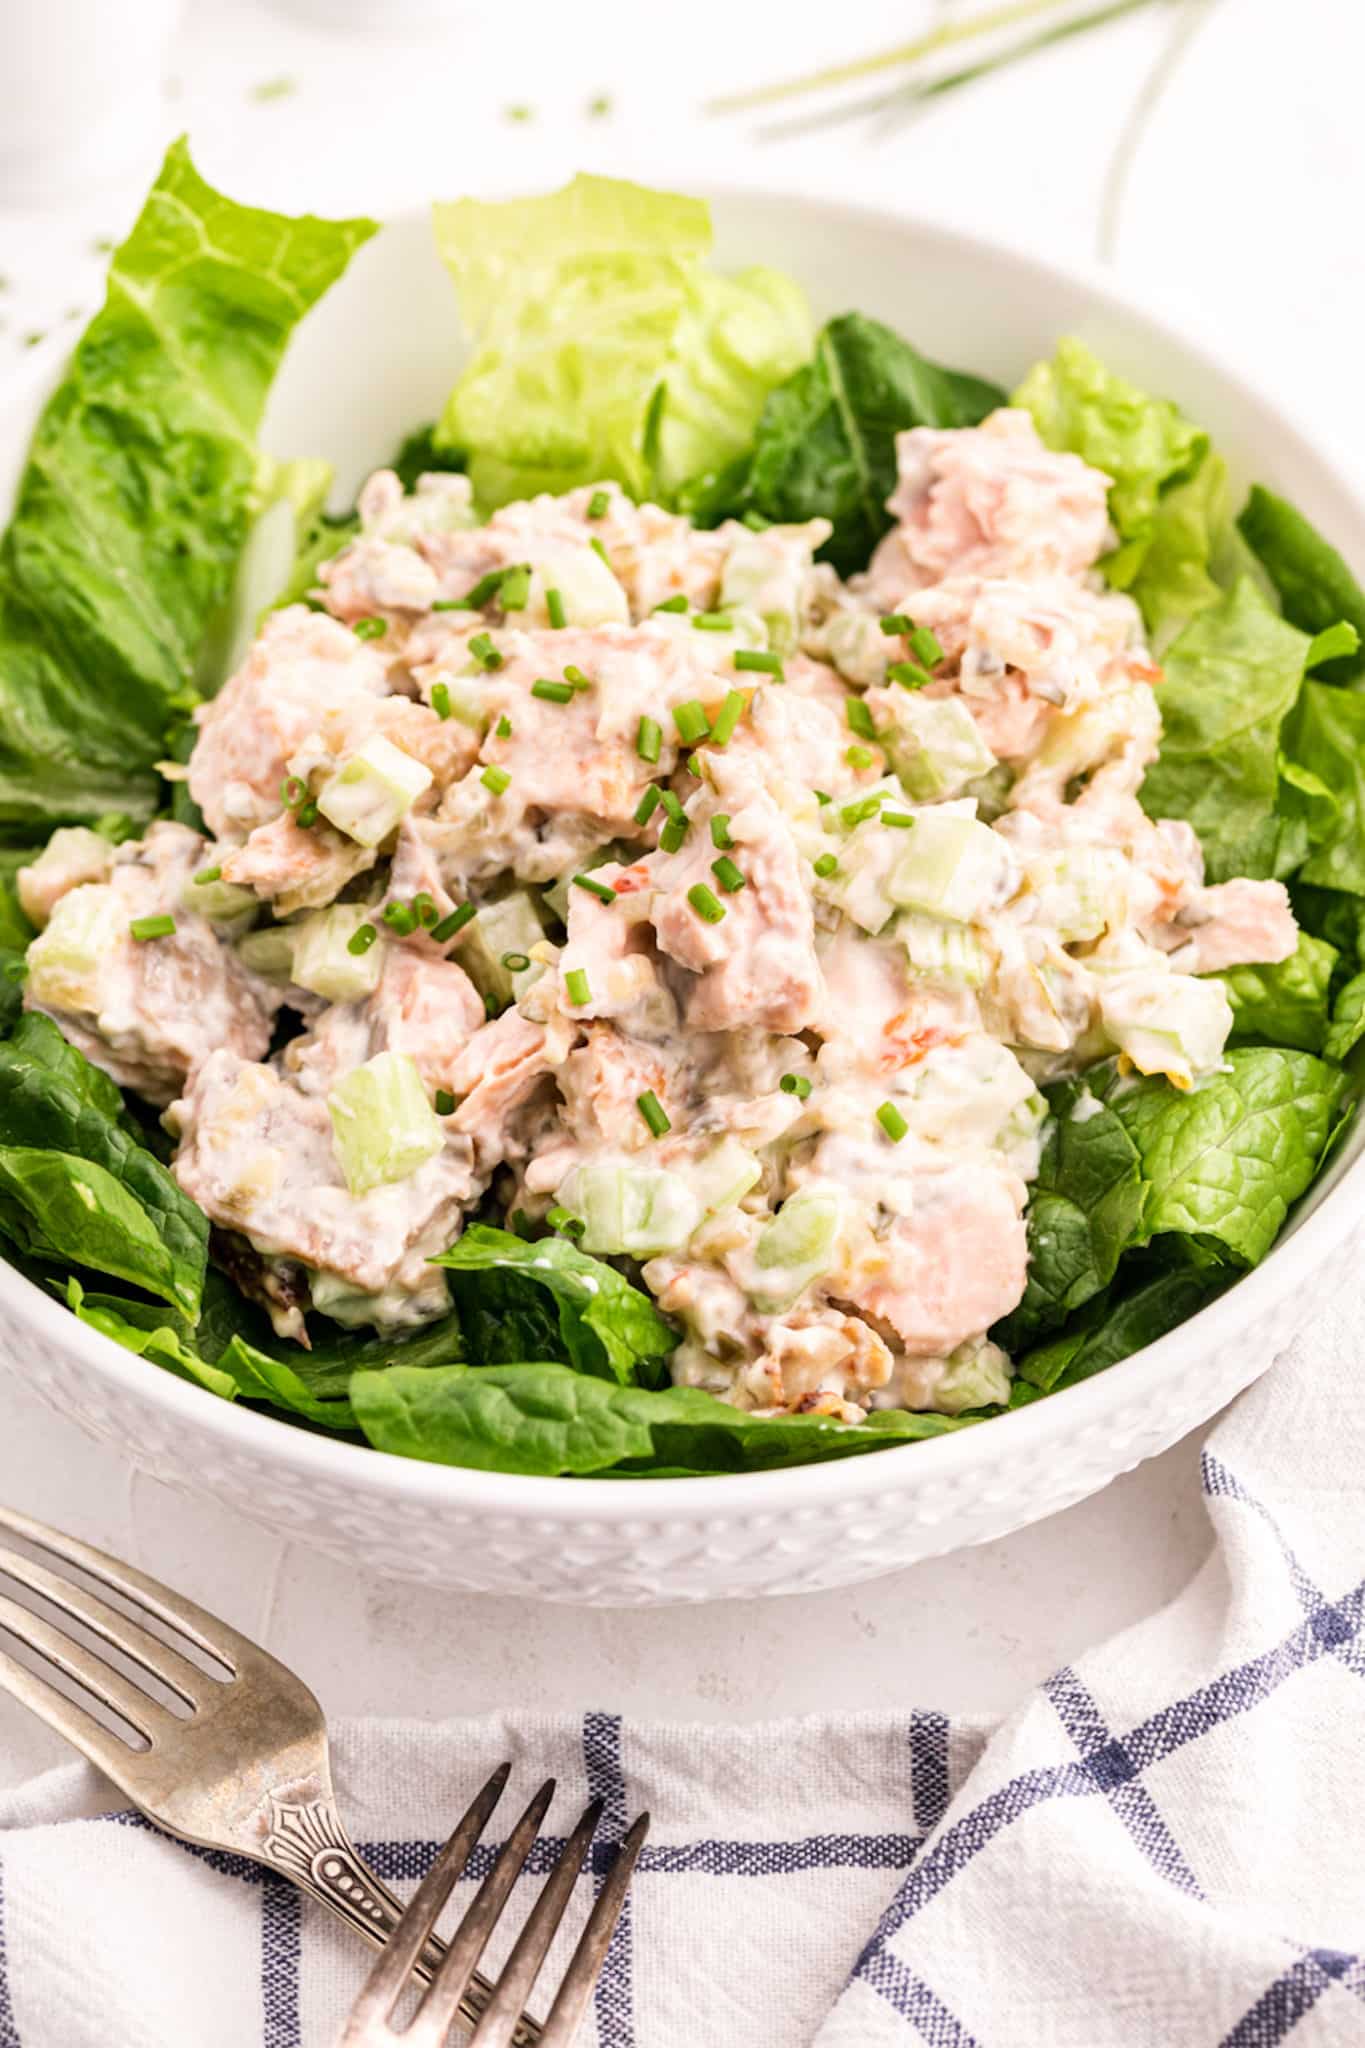 Salmon salad with celery and mayo topping lettuce in a large white bowl.